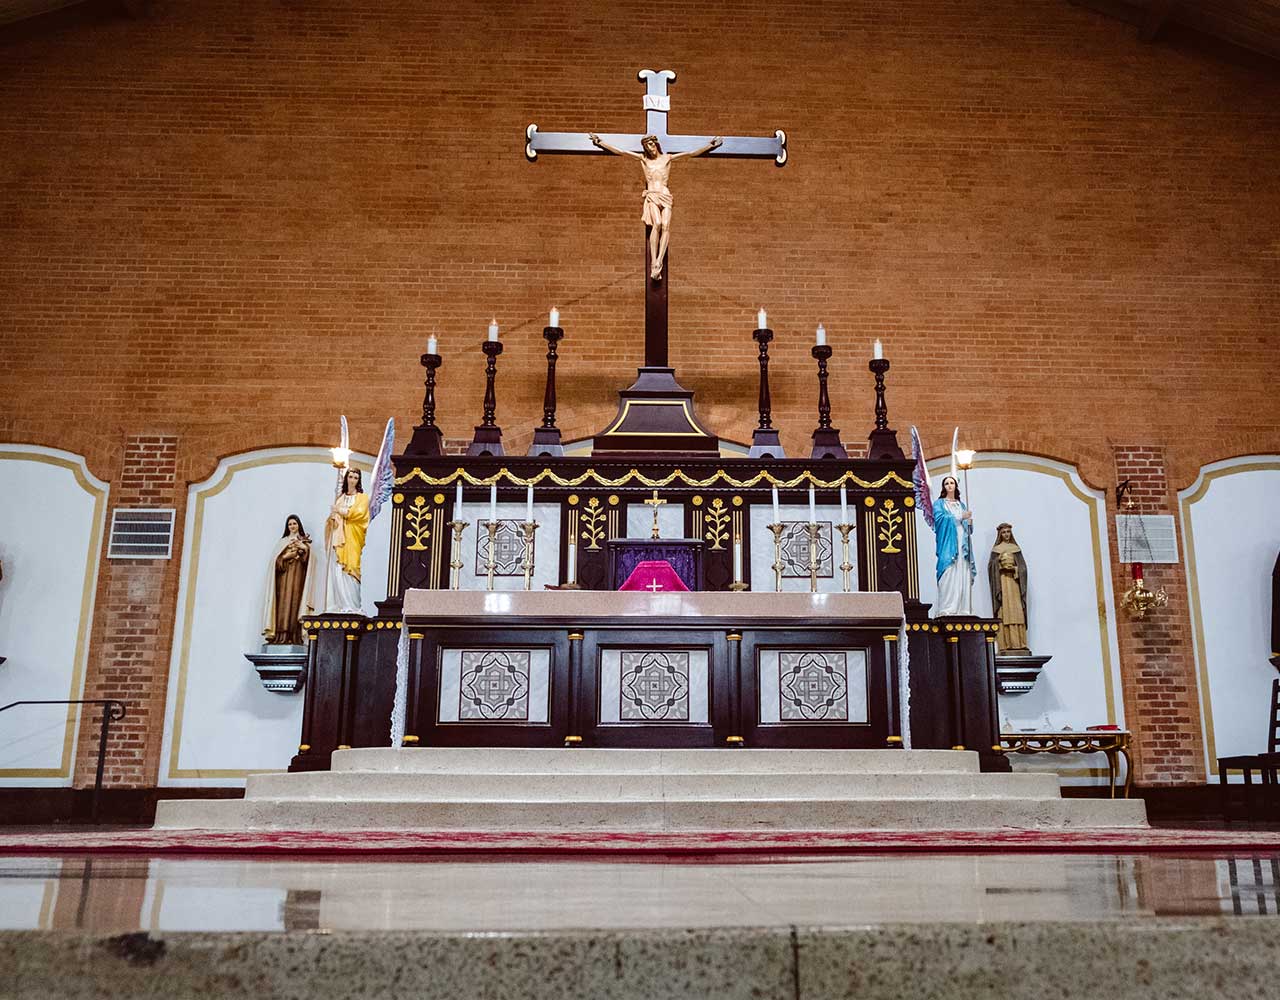 The Altar at St. Catherine of Siena Church